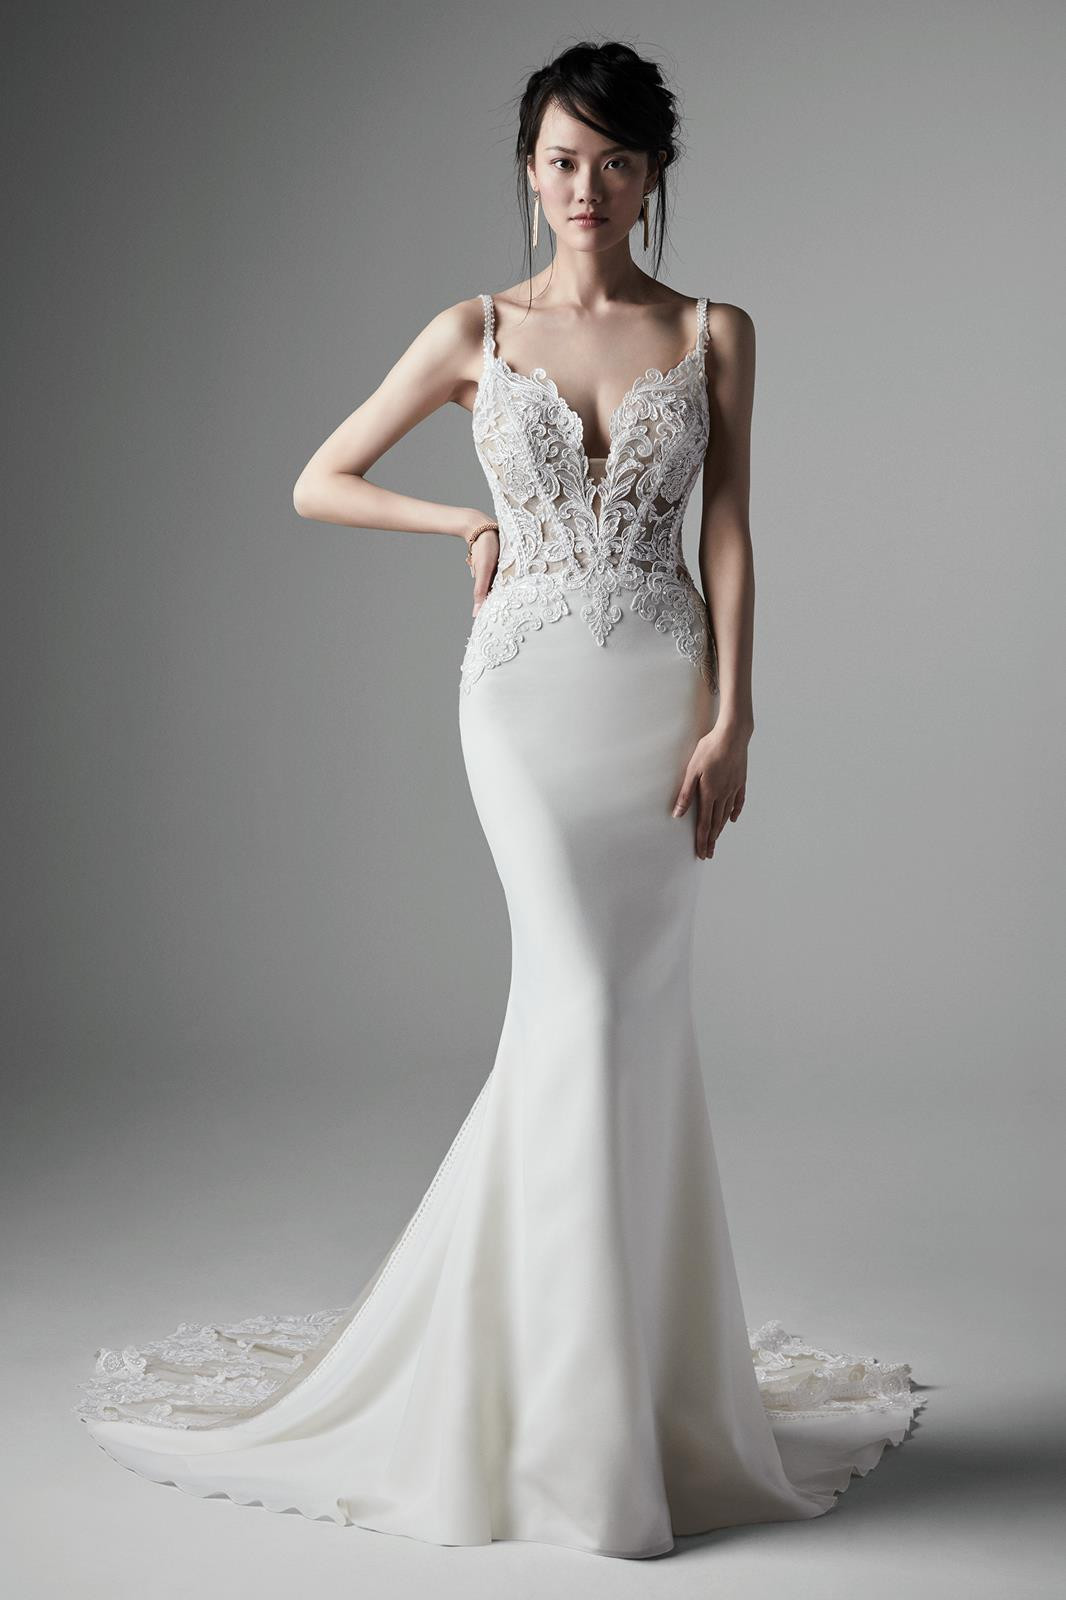 Cambridge Wedding Dress from Sottero and Midgley hitched